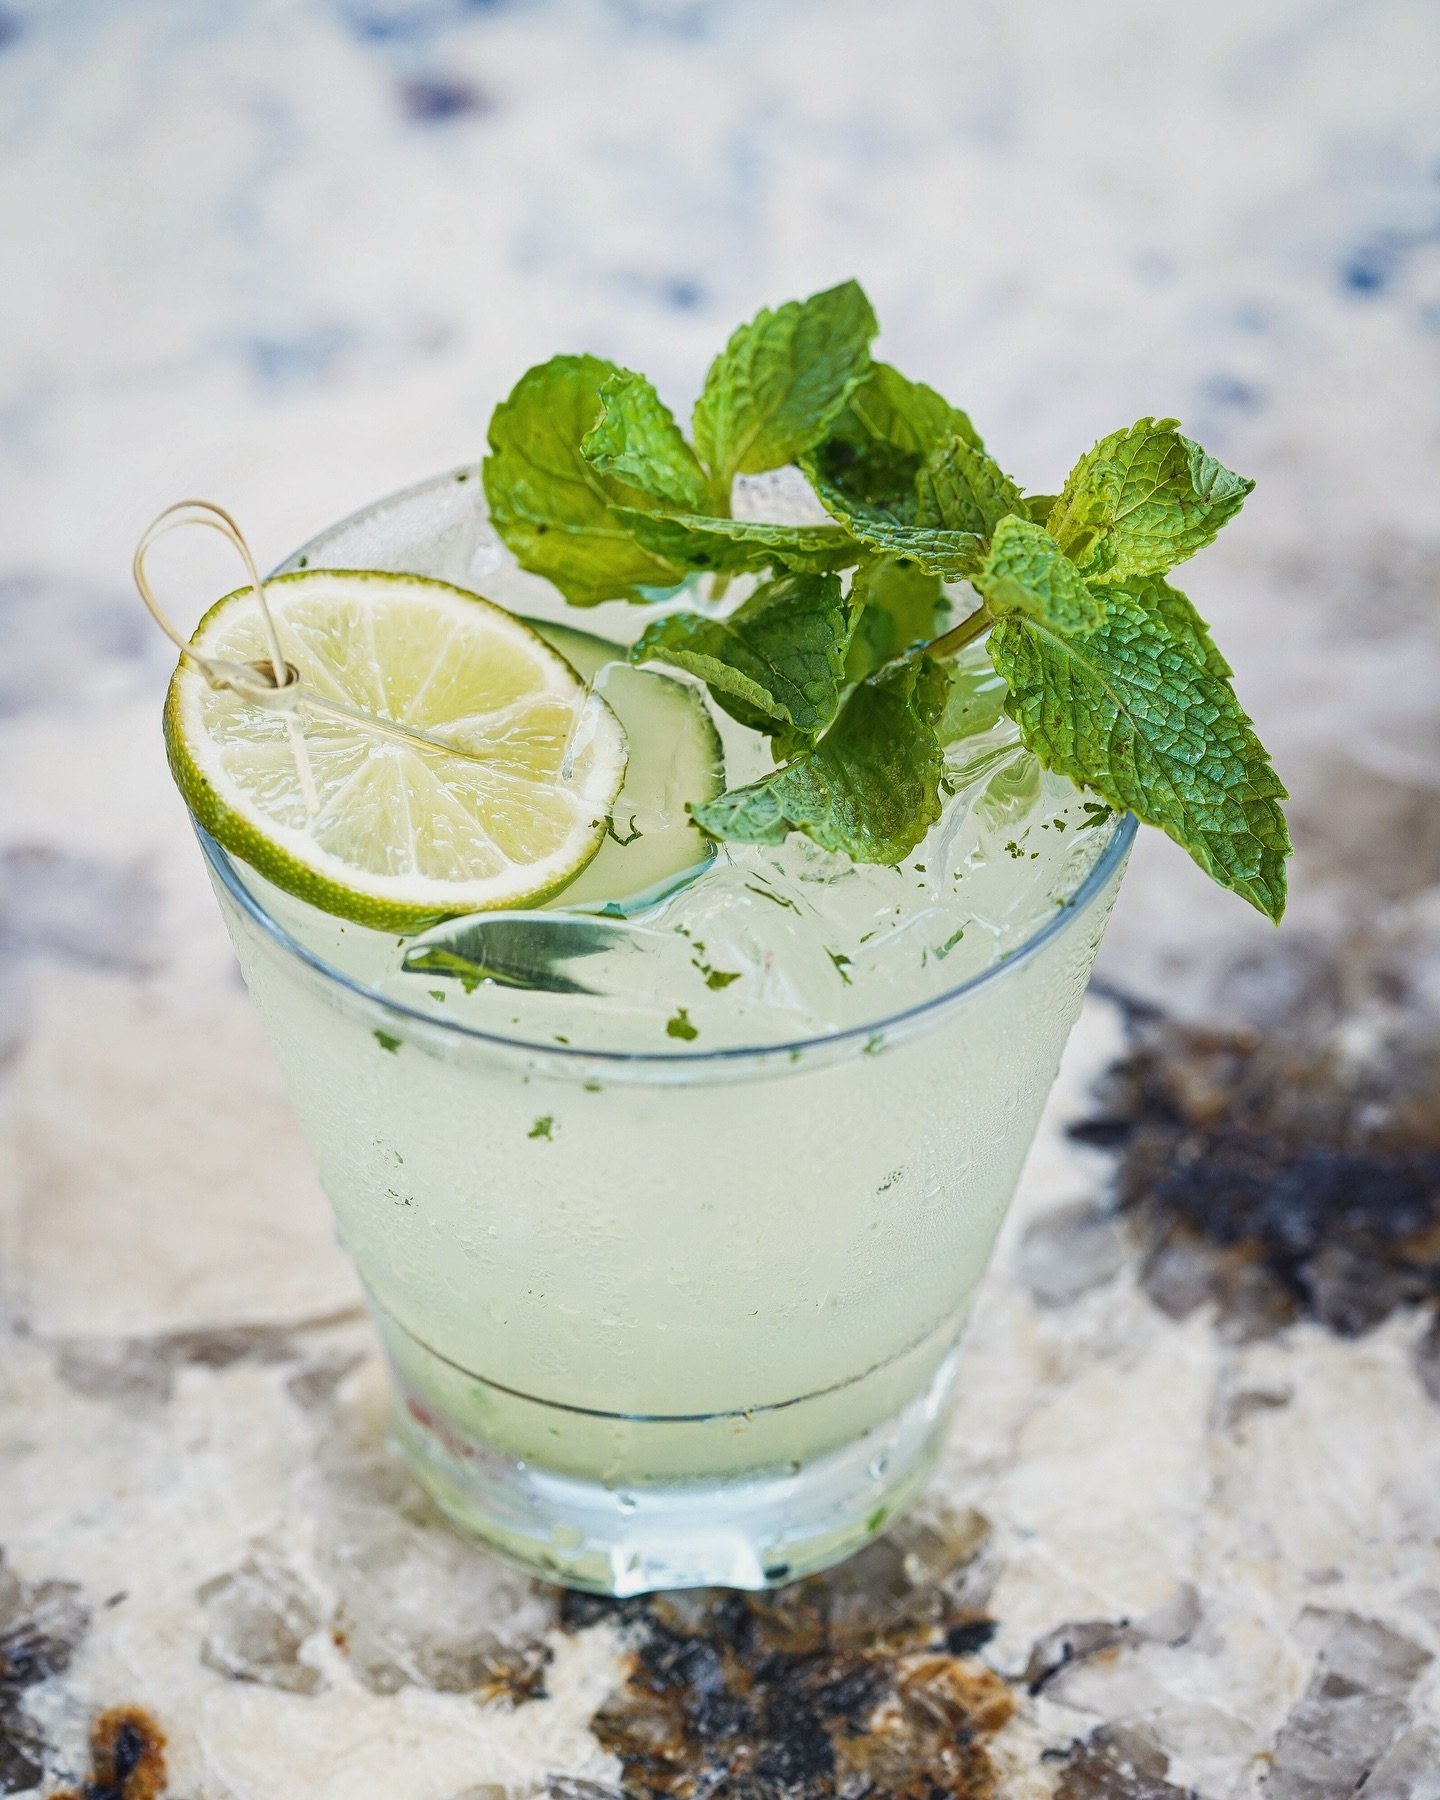 Let the weekend fun beGIN! 😄

P&rsquo;s B&rsquo;s Knees: gin, simple, cucumber, lime, mint